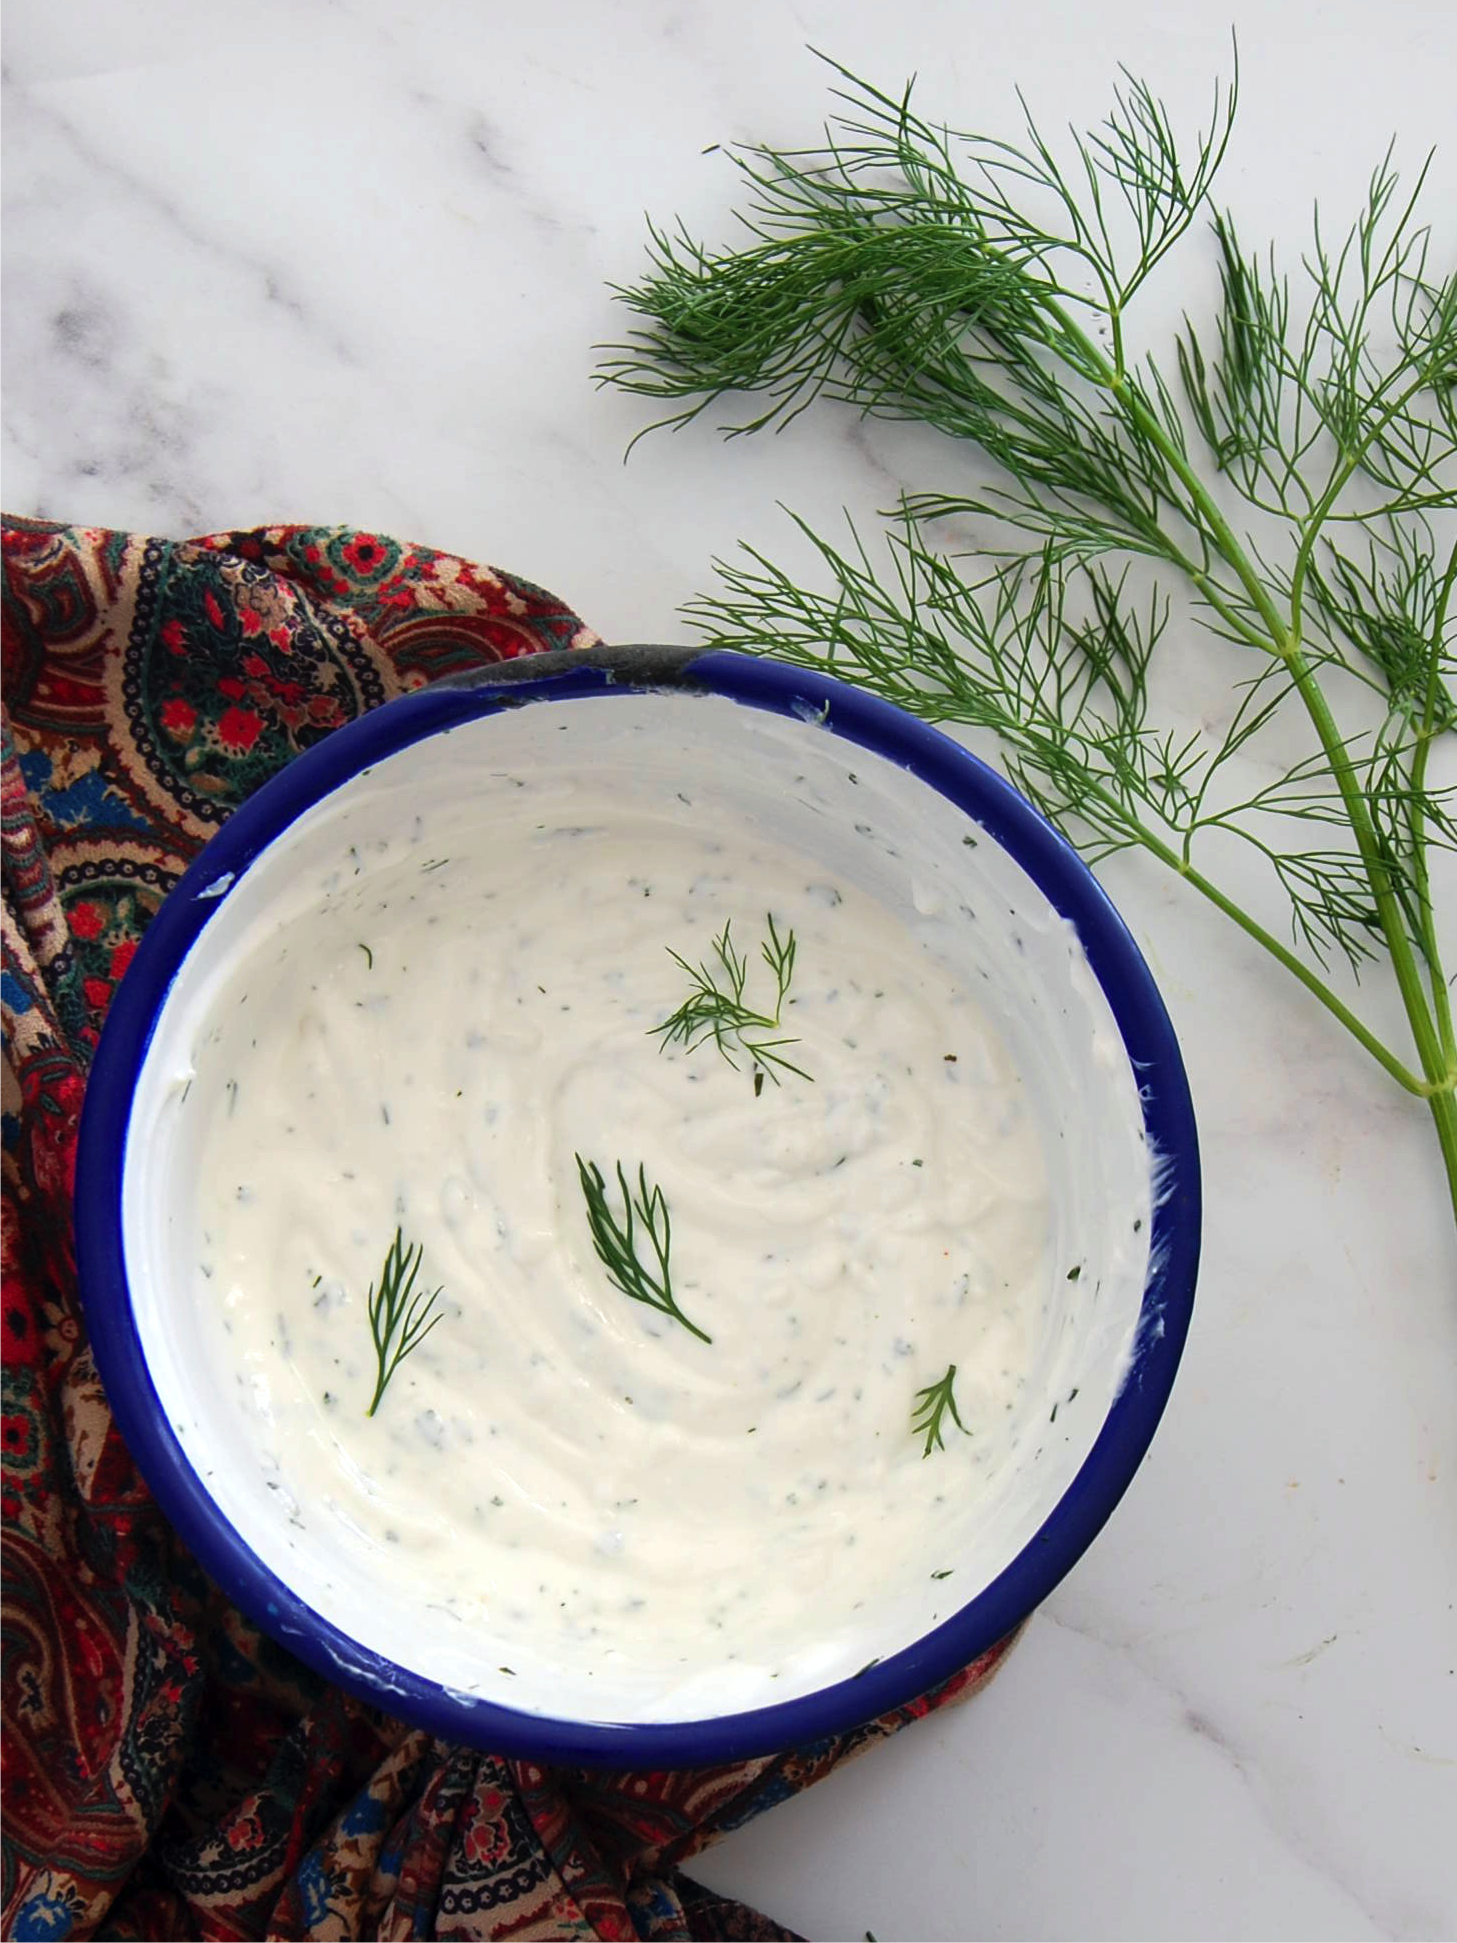 Turkish yoghurt meze piled into a bowl with a scattering of dill fronds. The bowl is surrounded by paisley towel and one dill stem